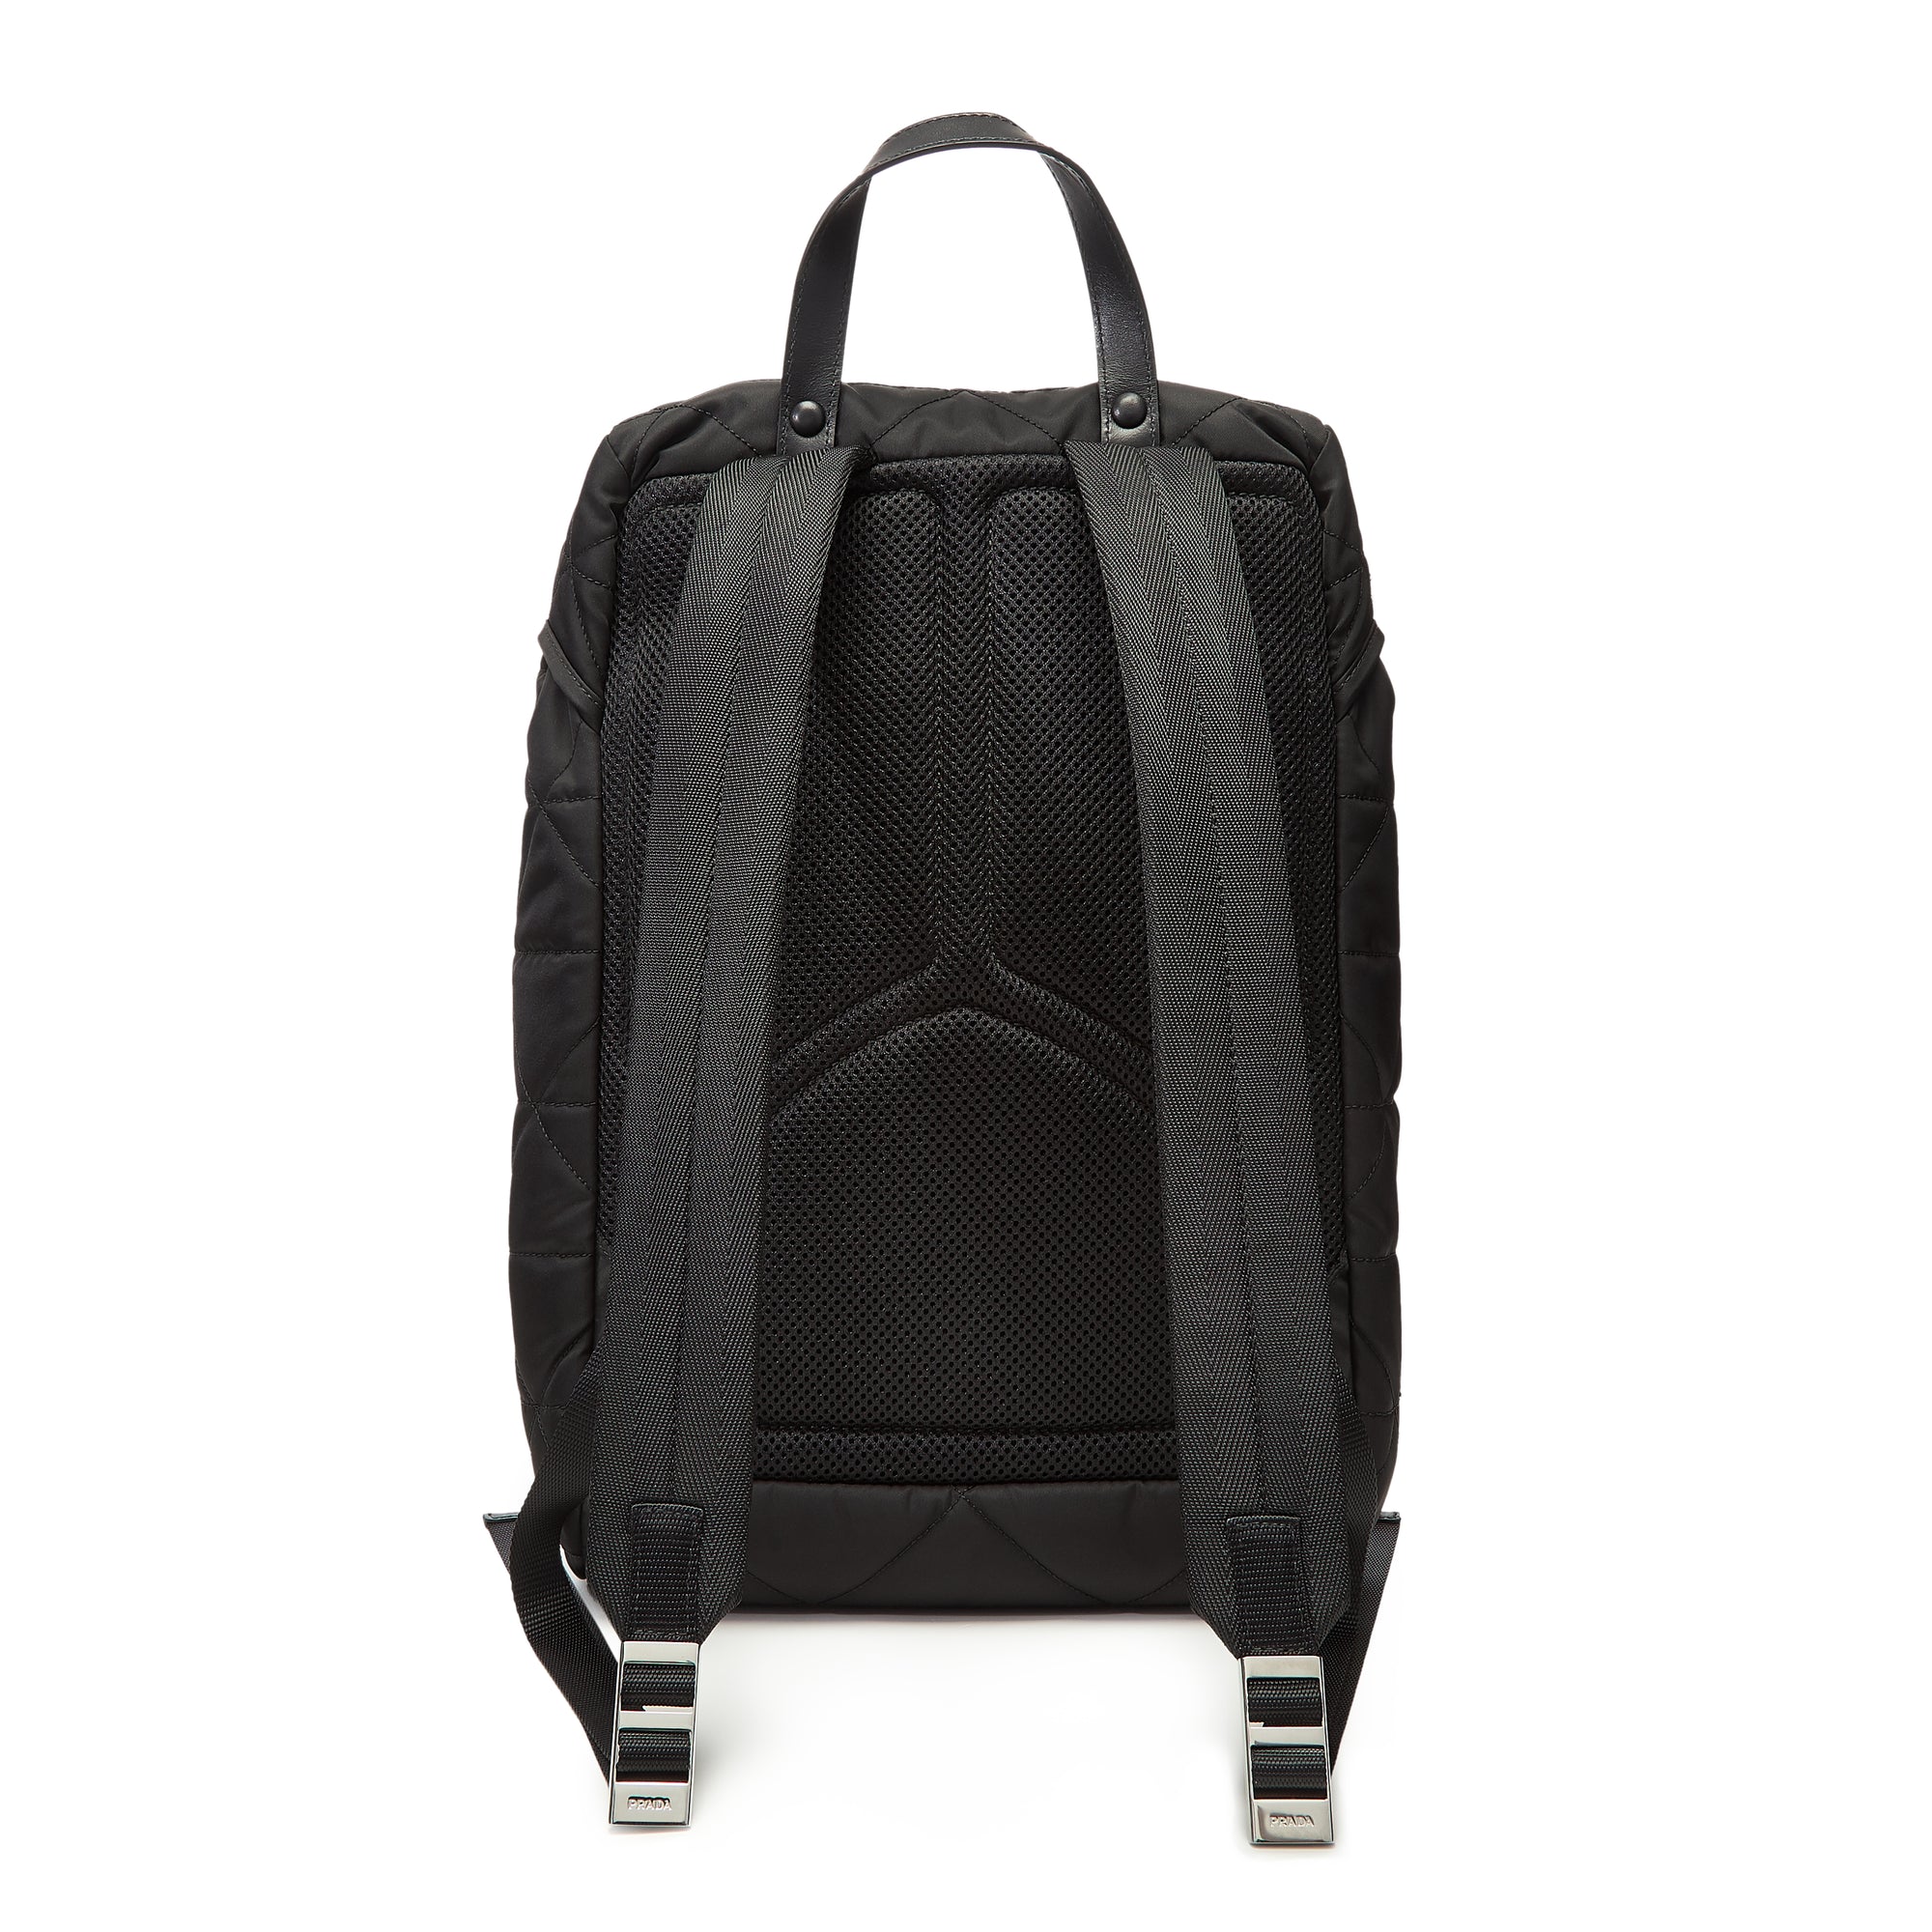 Prada - Men's Re-Nylon and Saffiano Leather Backpack - (Black) view 3